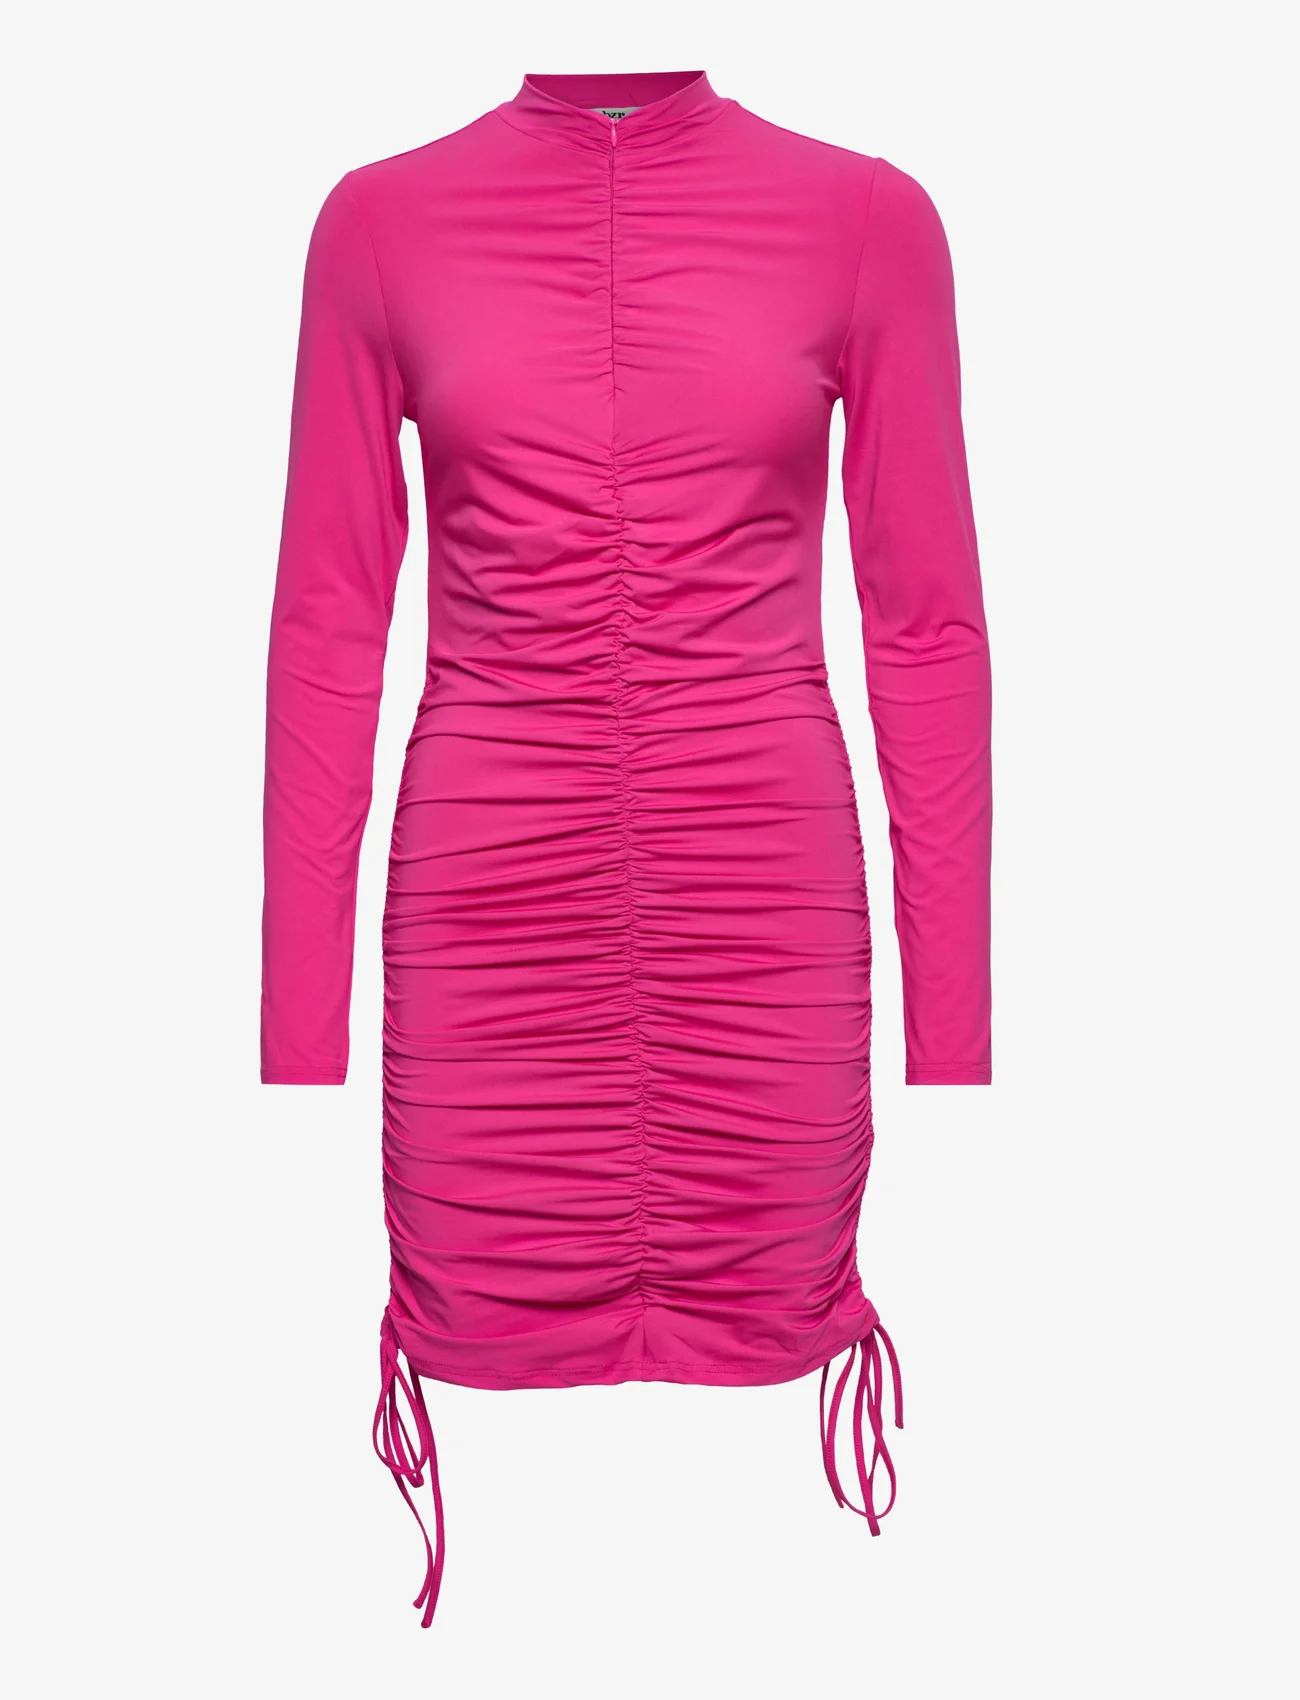 bzr - Power Visale dress - party wear at outlet prices - pink - 0